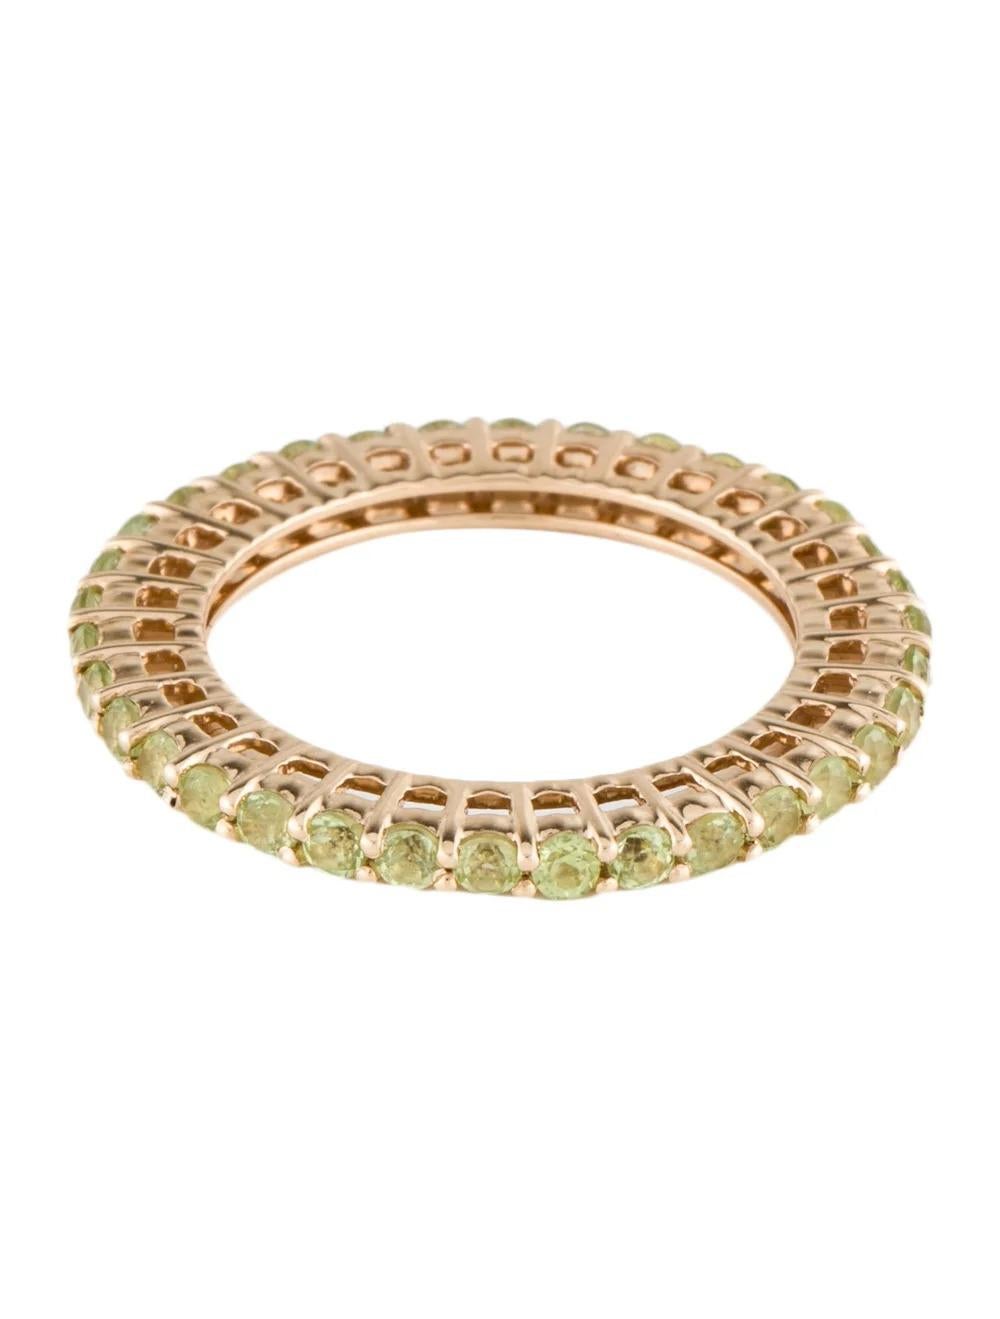 Round Cut Vintage 14K Peridot Eternity Band Ring Size 7 - Classic Style & Timeless Beauty For Sale